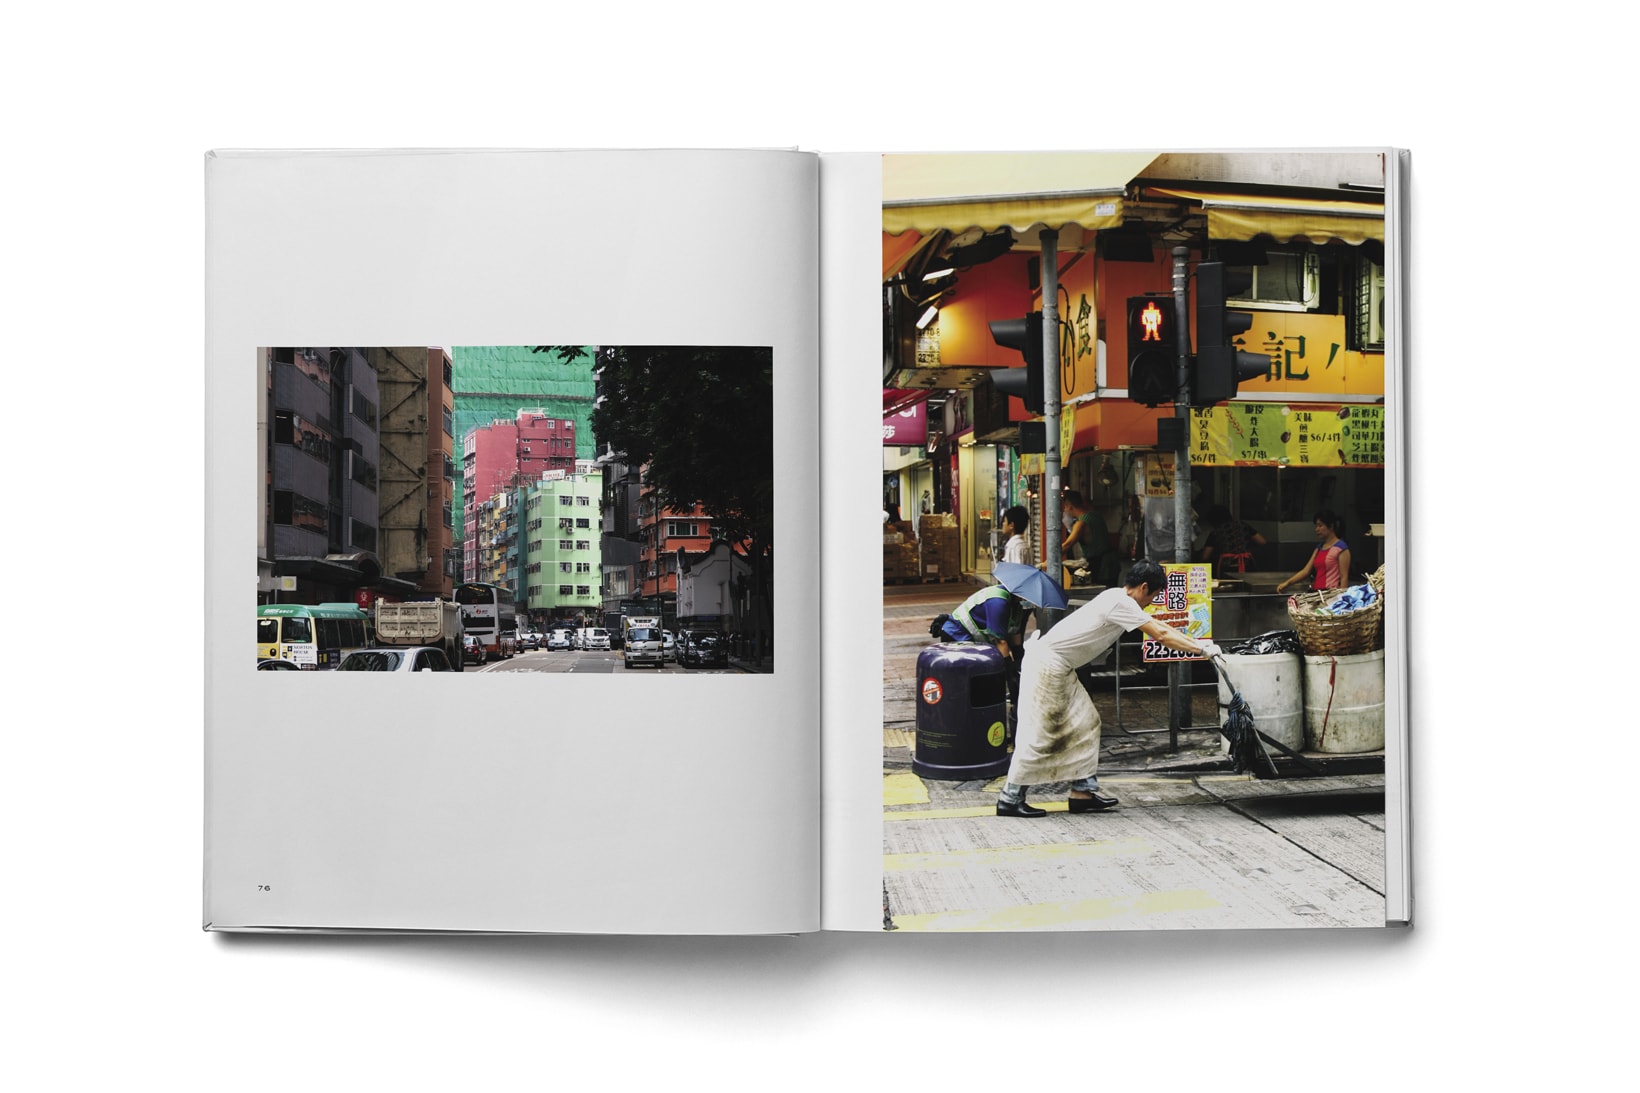 karl hab 24h hong kong book photography photographer visuals images spreads urban landscape asia travel